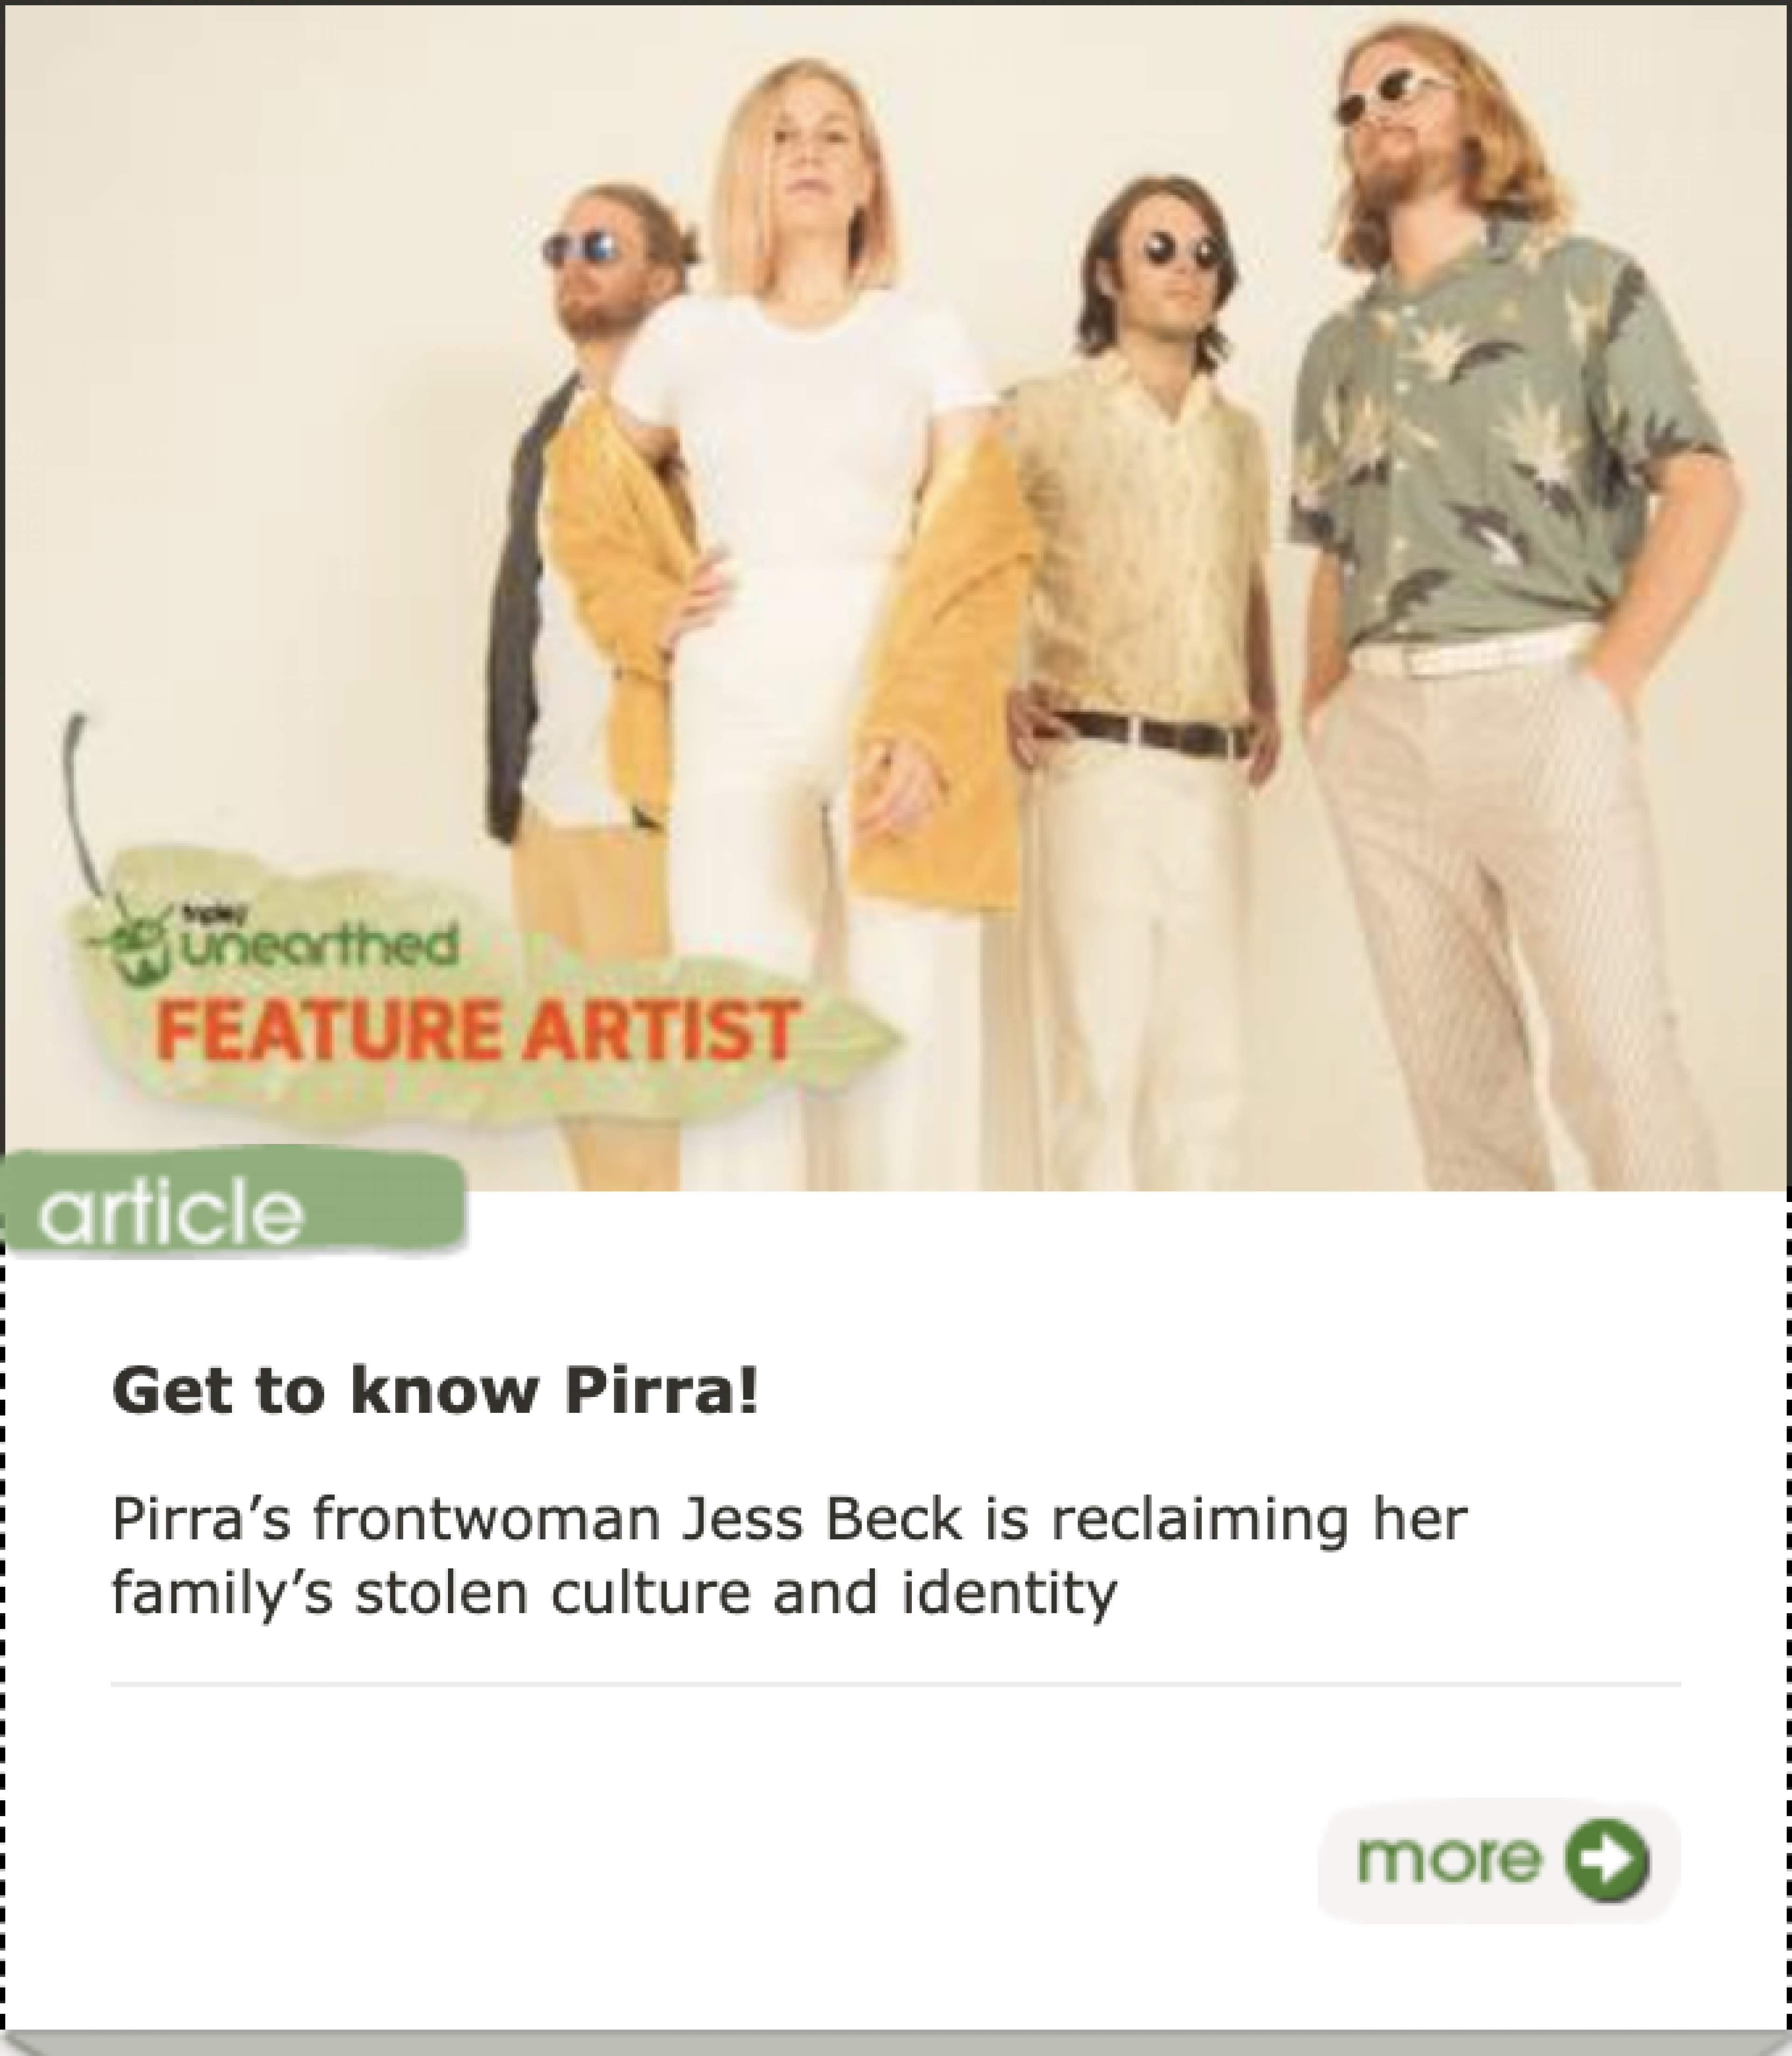 Pirra Triple J Unearthed - 'Feature Artist'